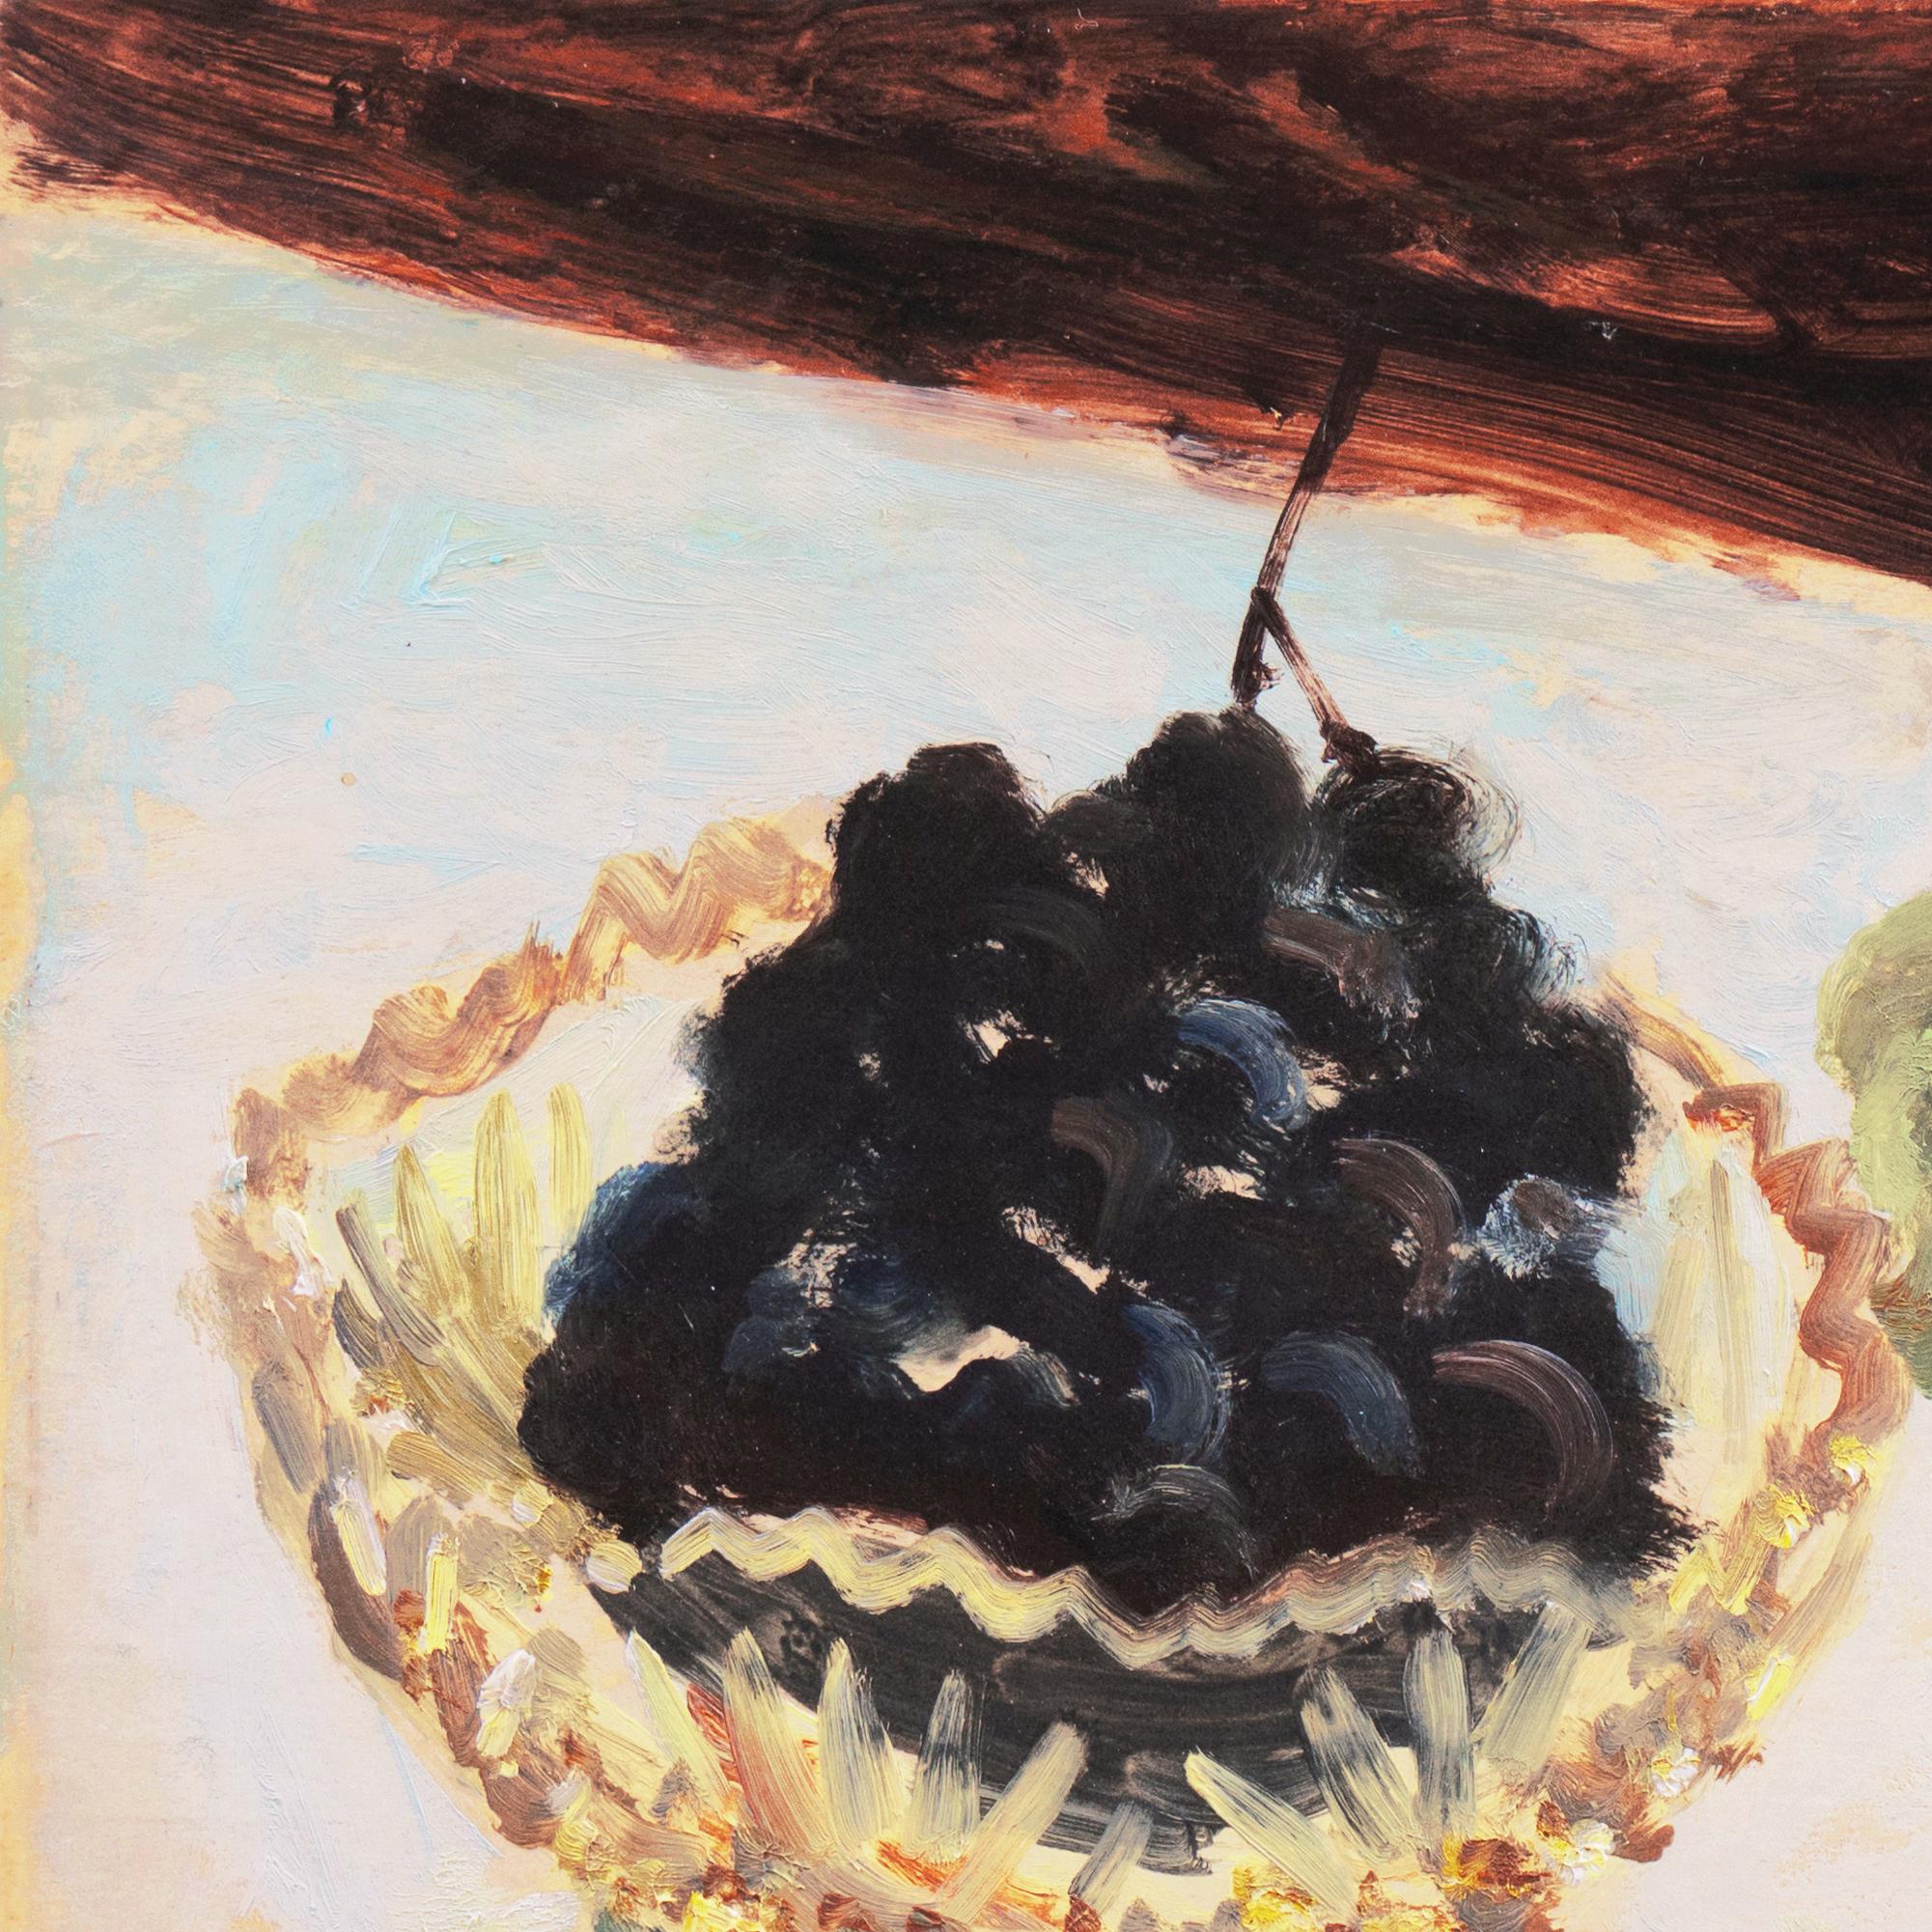 'Still Life of Green and Black Grapes', Tokyo School of Fine Arts, Academy Award - Post-Impressionist Painting by Sanzo Wada